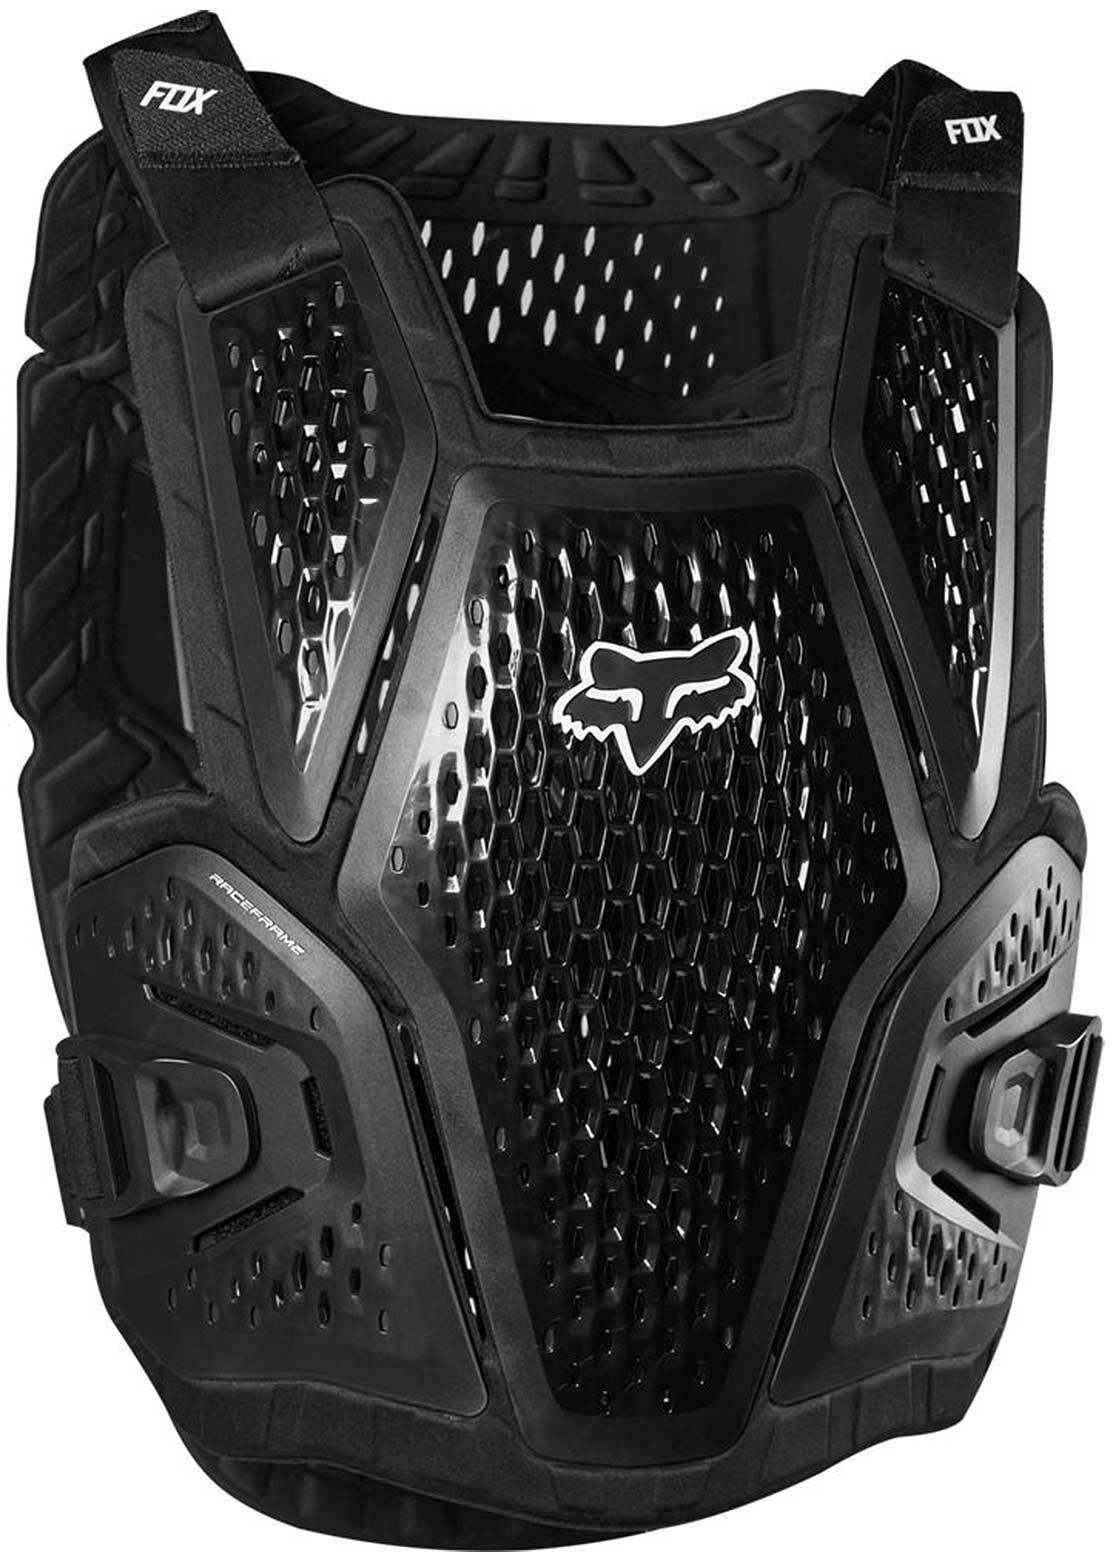 Fox Junior Raceframe Roost Chest Guard Black